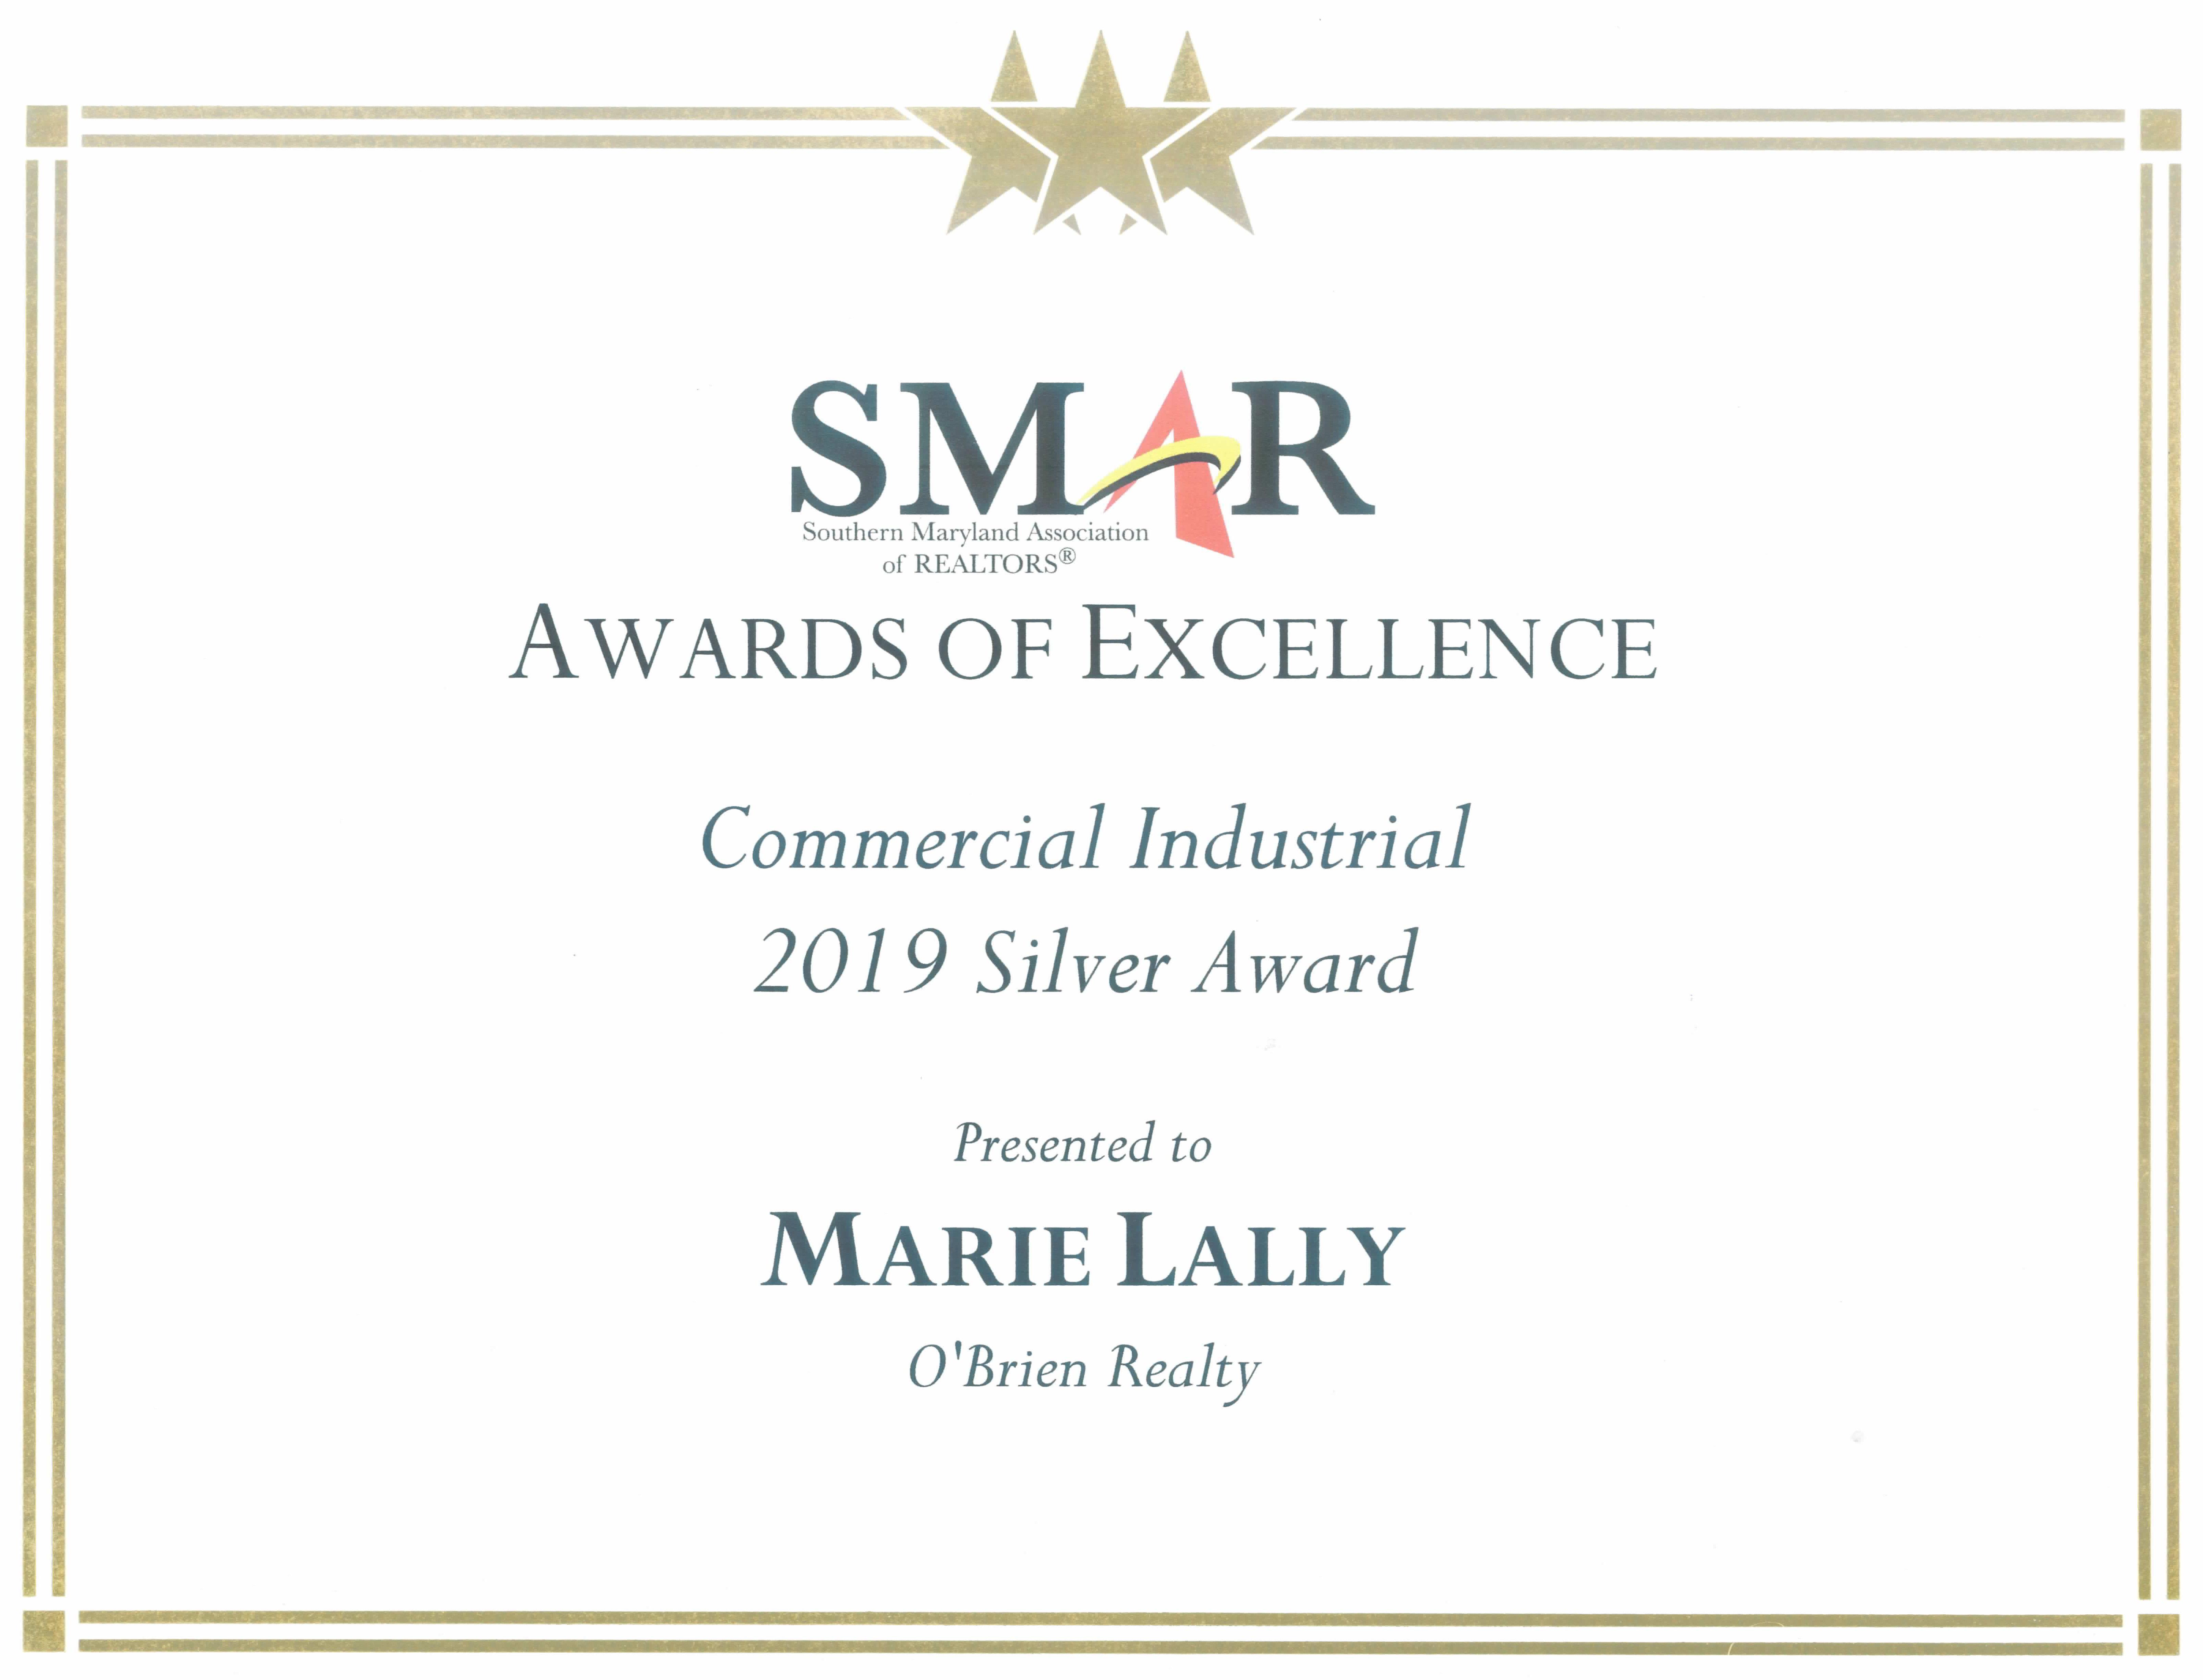 Marie Lally is a top producing agent in Southern MD.  Marie Serves Buyer and Sellers of residential real estate in Saint Mary's County, Calvert County, Charles County and other areas!  Marie is a Diamond Award Winning Realtor - The Best of Southern Maryland!